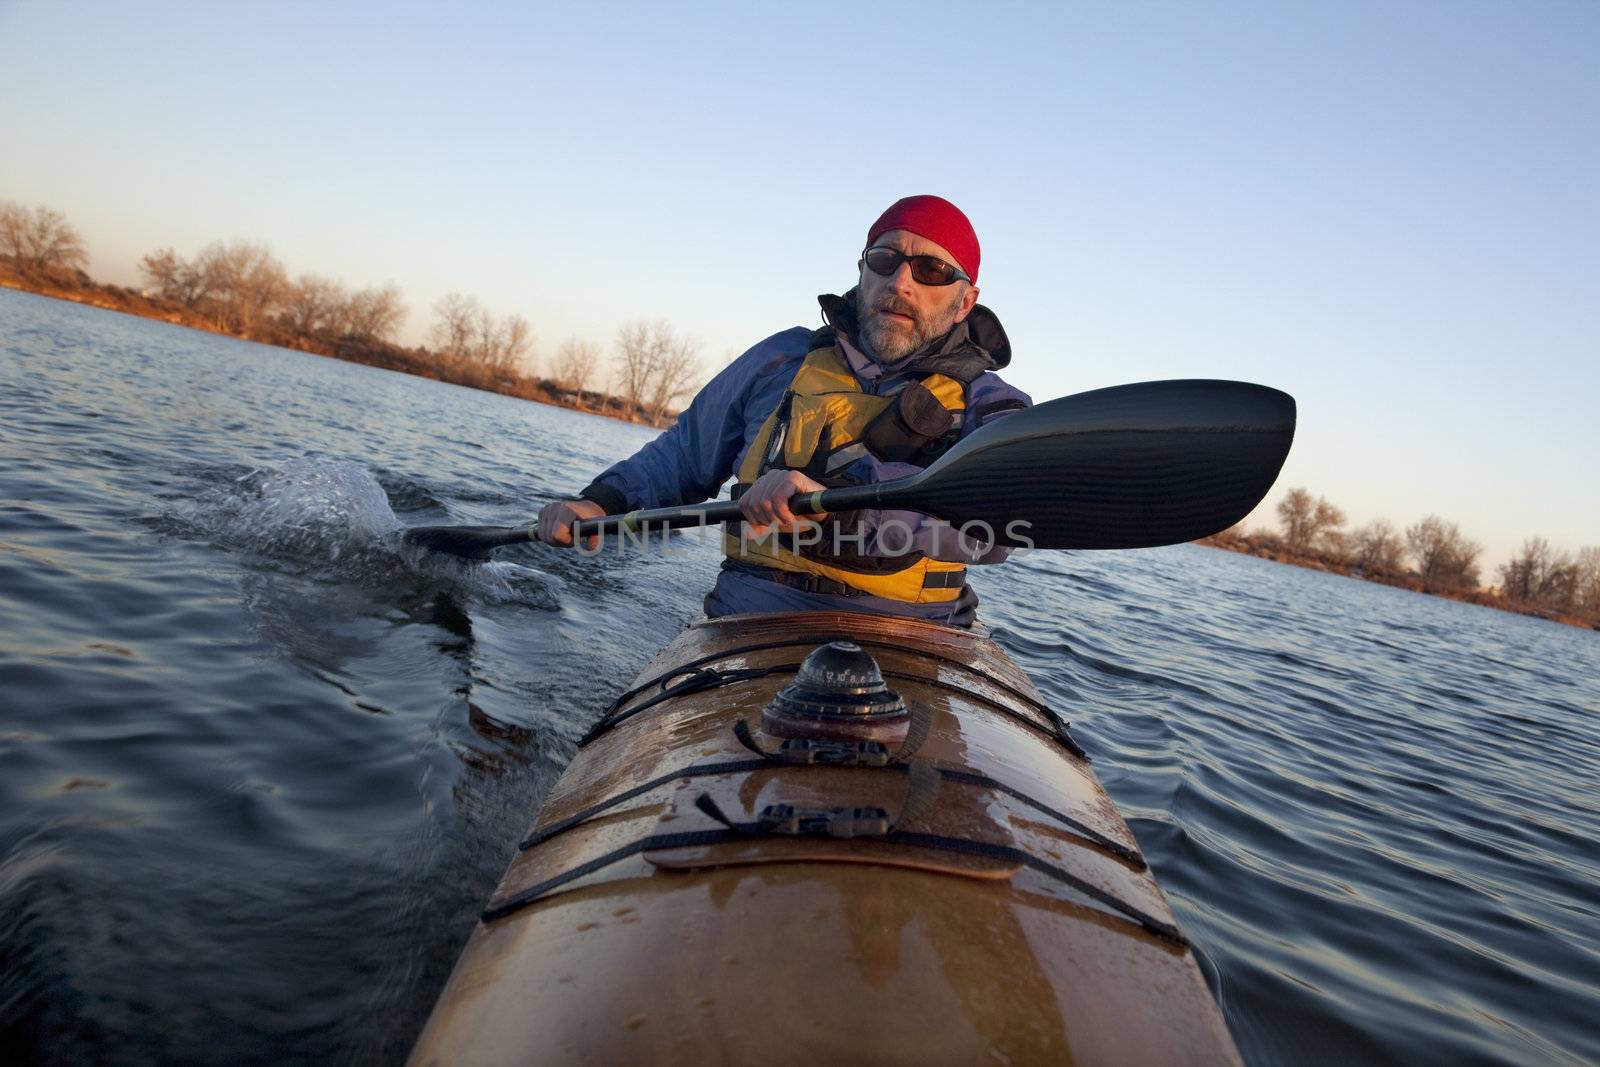 mature male paddler exercising (turning boat using rudder stroke with his wing carbon fiber paddle) in a home built wooden sea kayak on lake, fall scenery  in Colorado, view from kayak bow